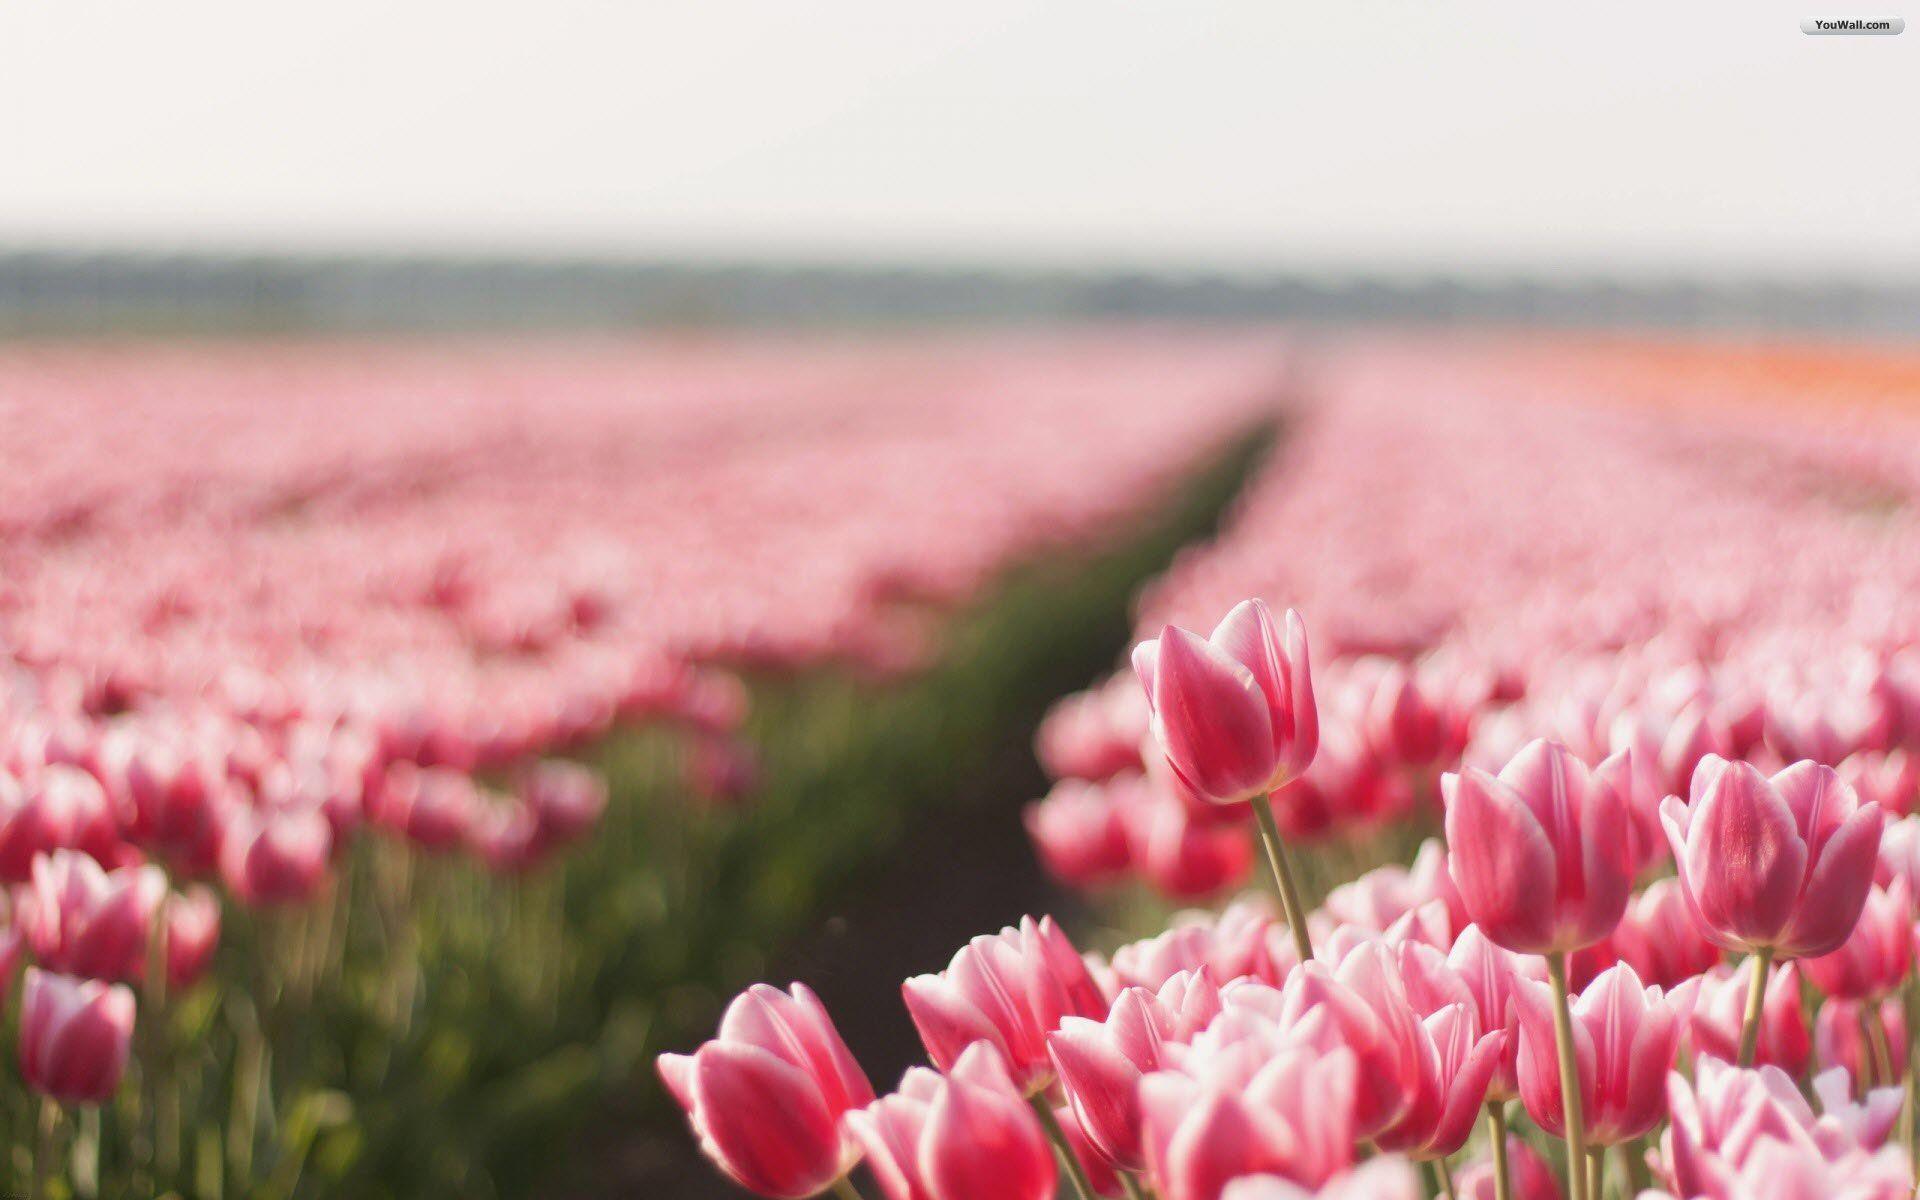 Pink Tulips HD Picture And Wallpaper. TanukinoSippo